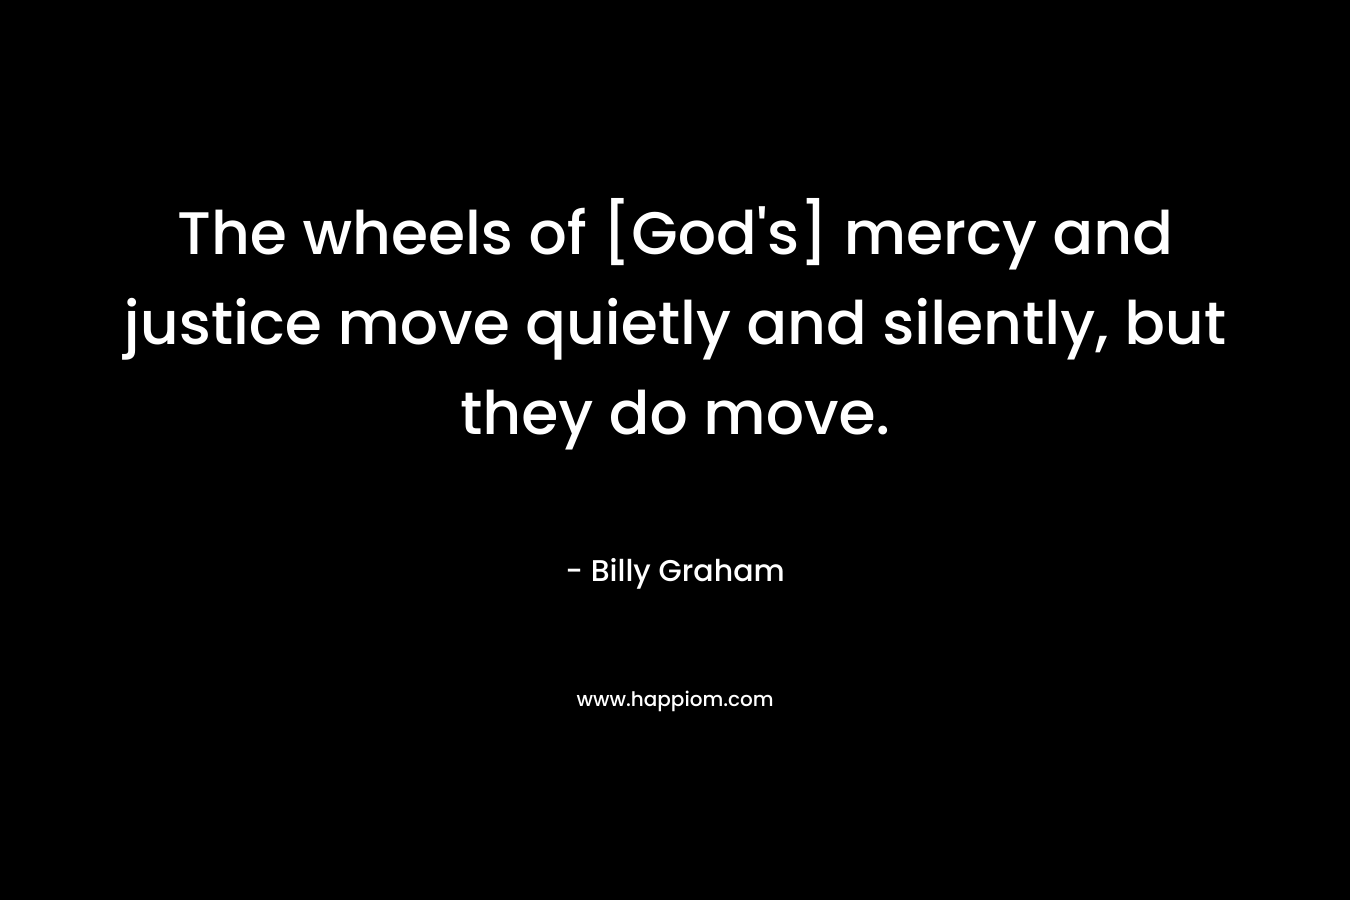 The wheels of [God’s] mercy and justice move quietly and silently, but they do move. – Billy Graham